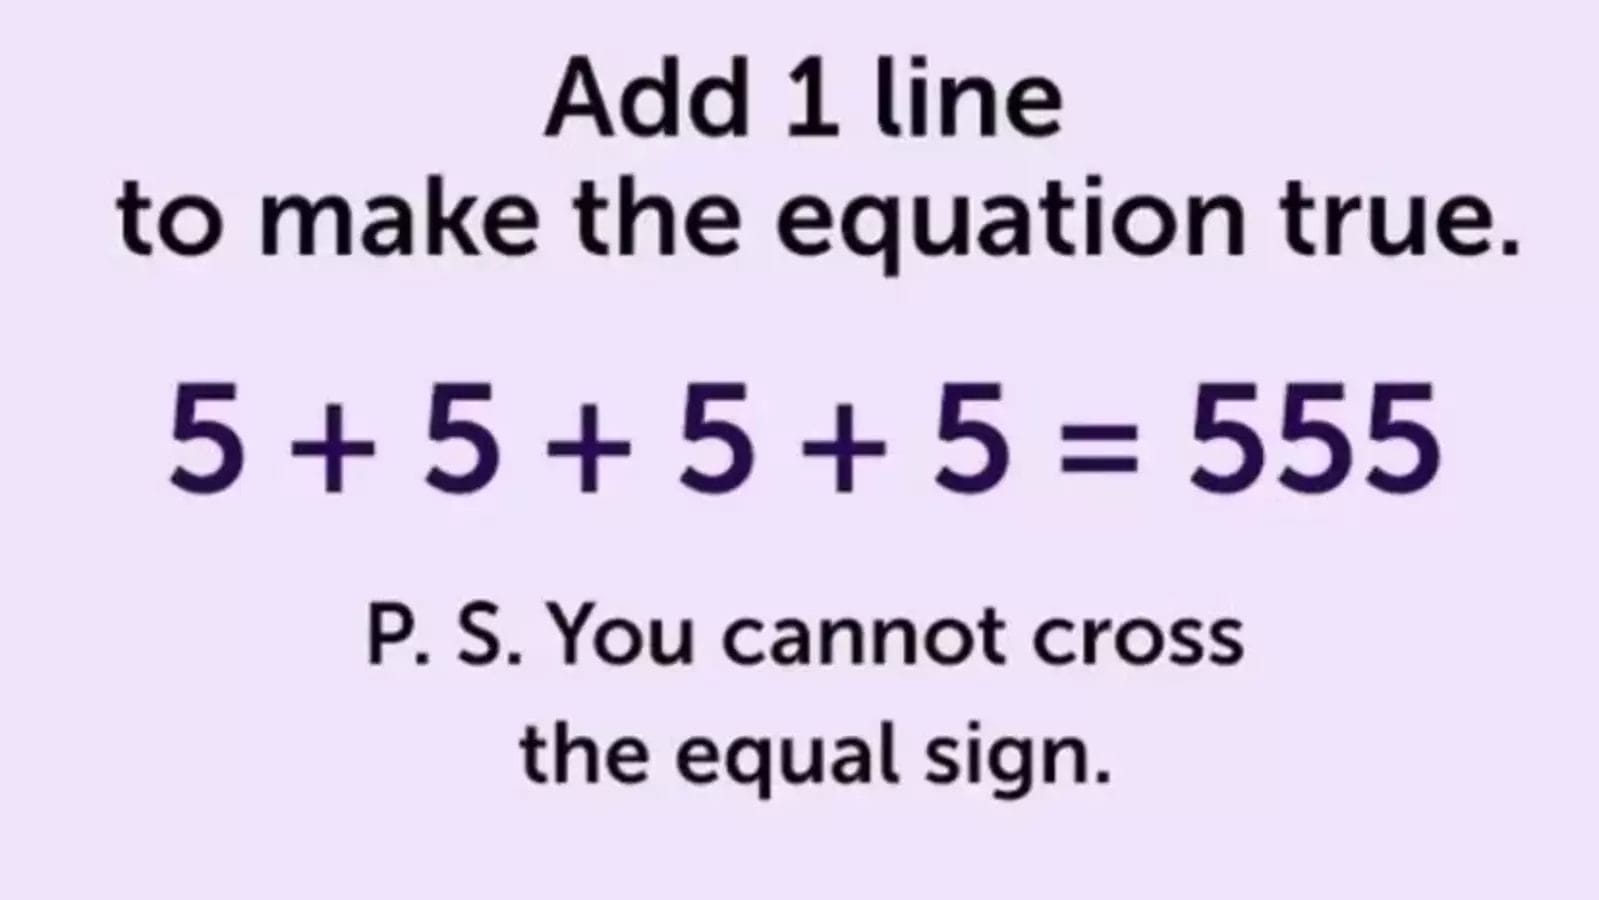 Brain teaser: Can you fix this maths equation by adding just 1 line? You have 10 seconds